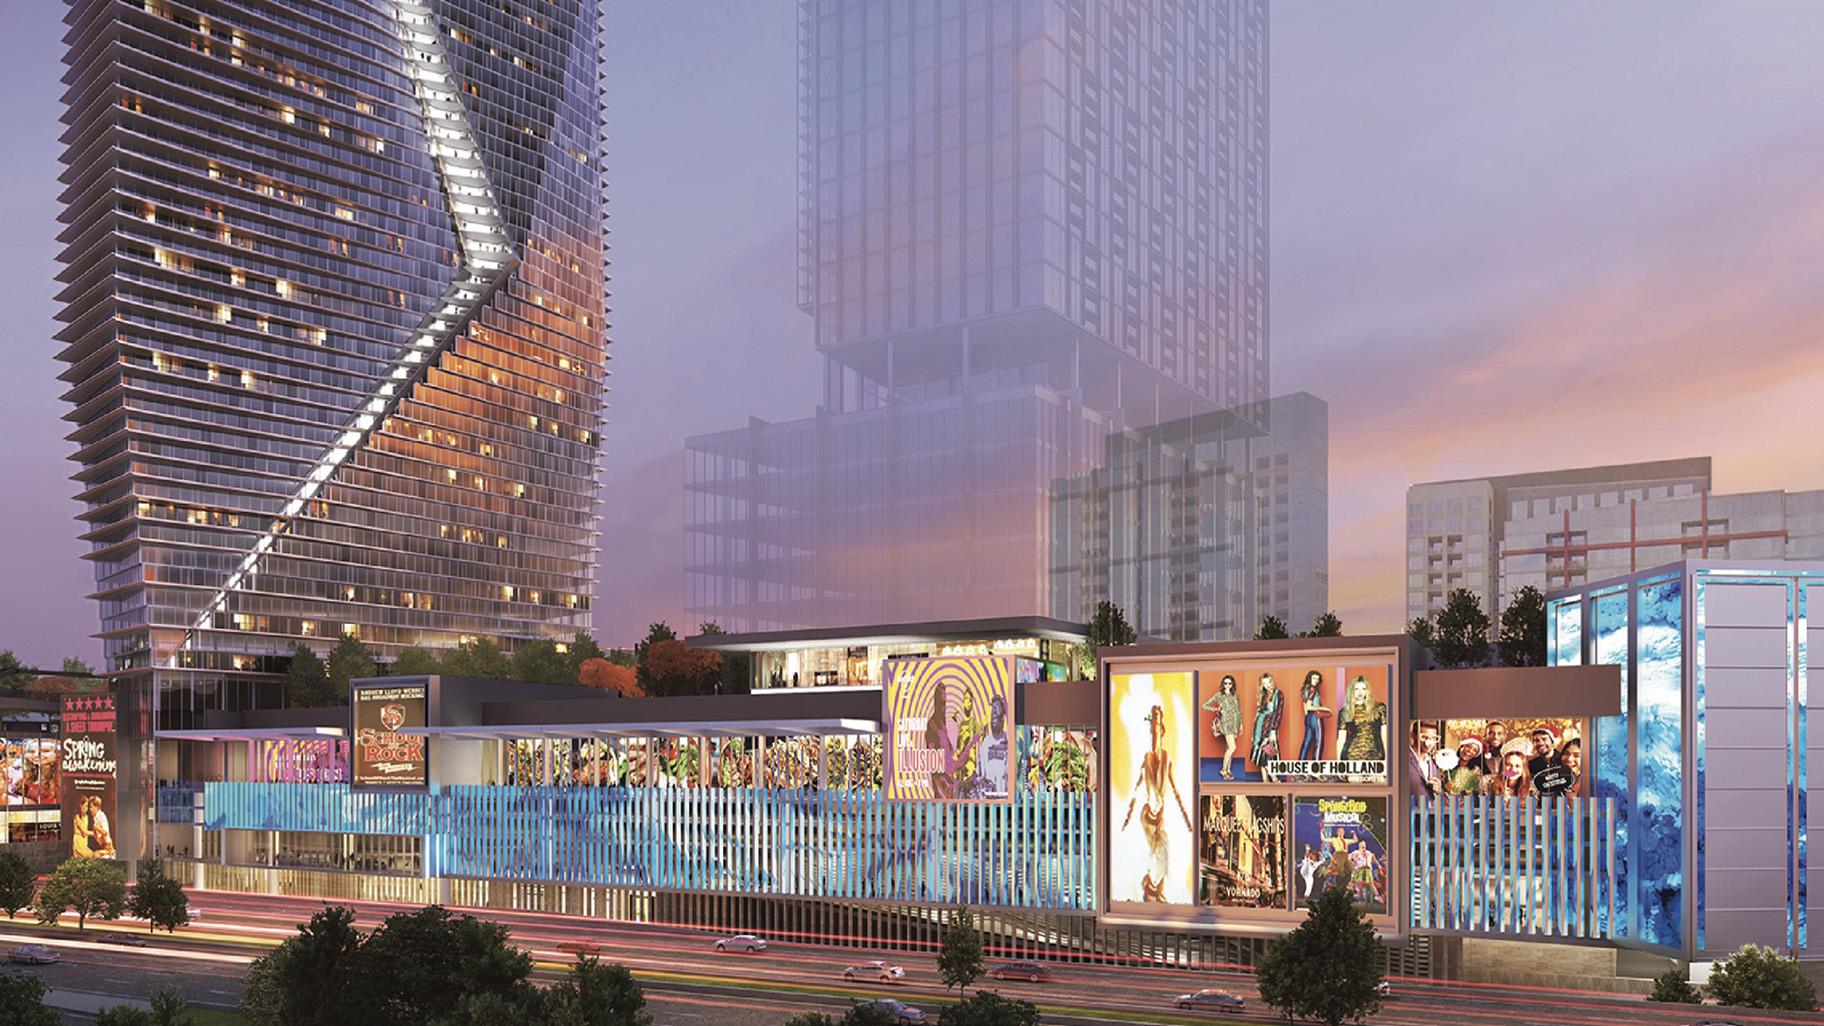 Hard Rock wants to build the casino and resort as part of the proposed One Central development, across DuSable Lake Shore Drive from Soldier Field. (Provided)